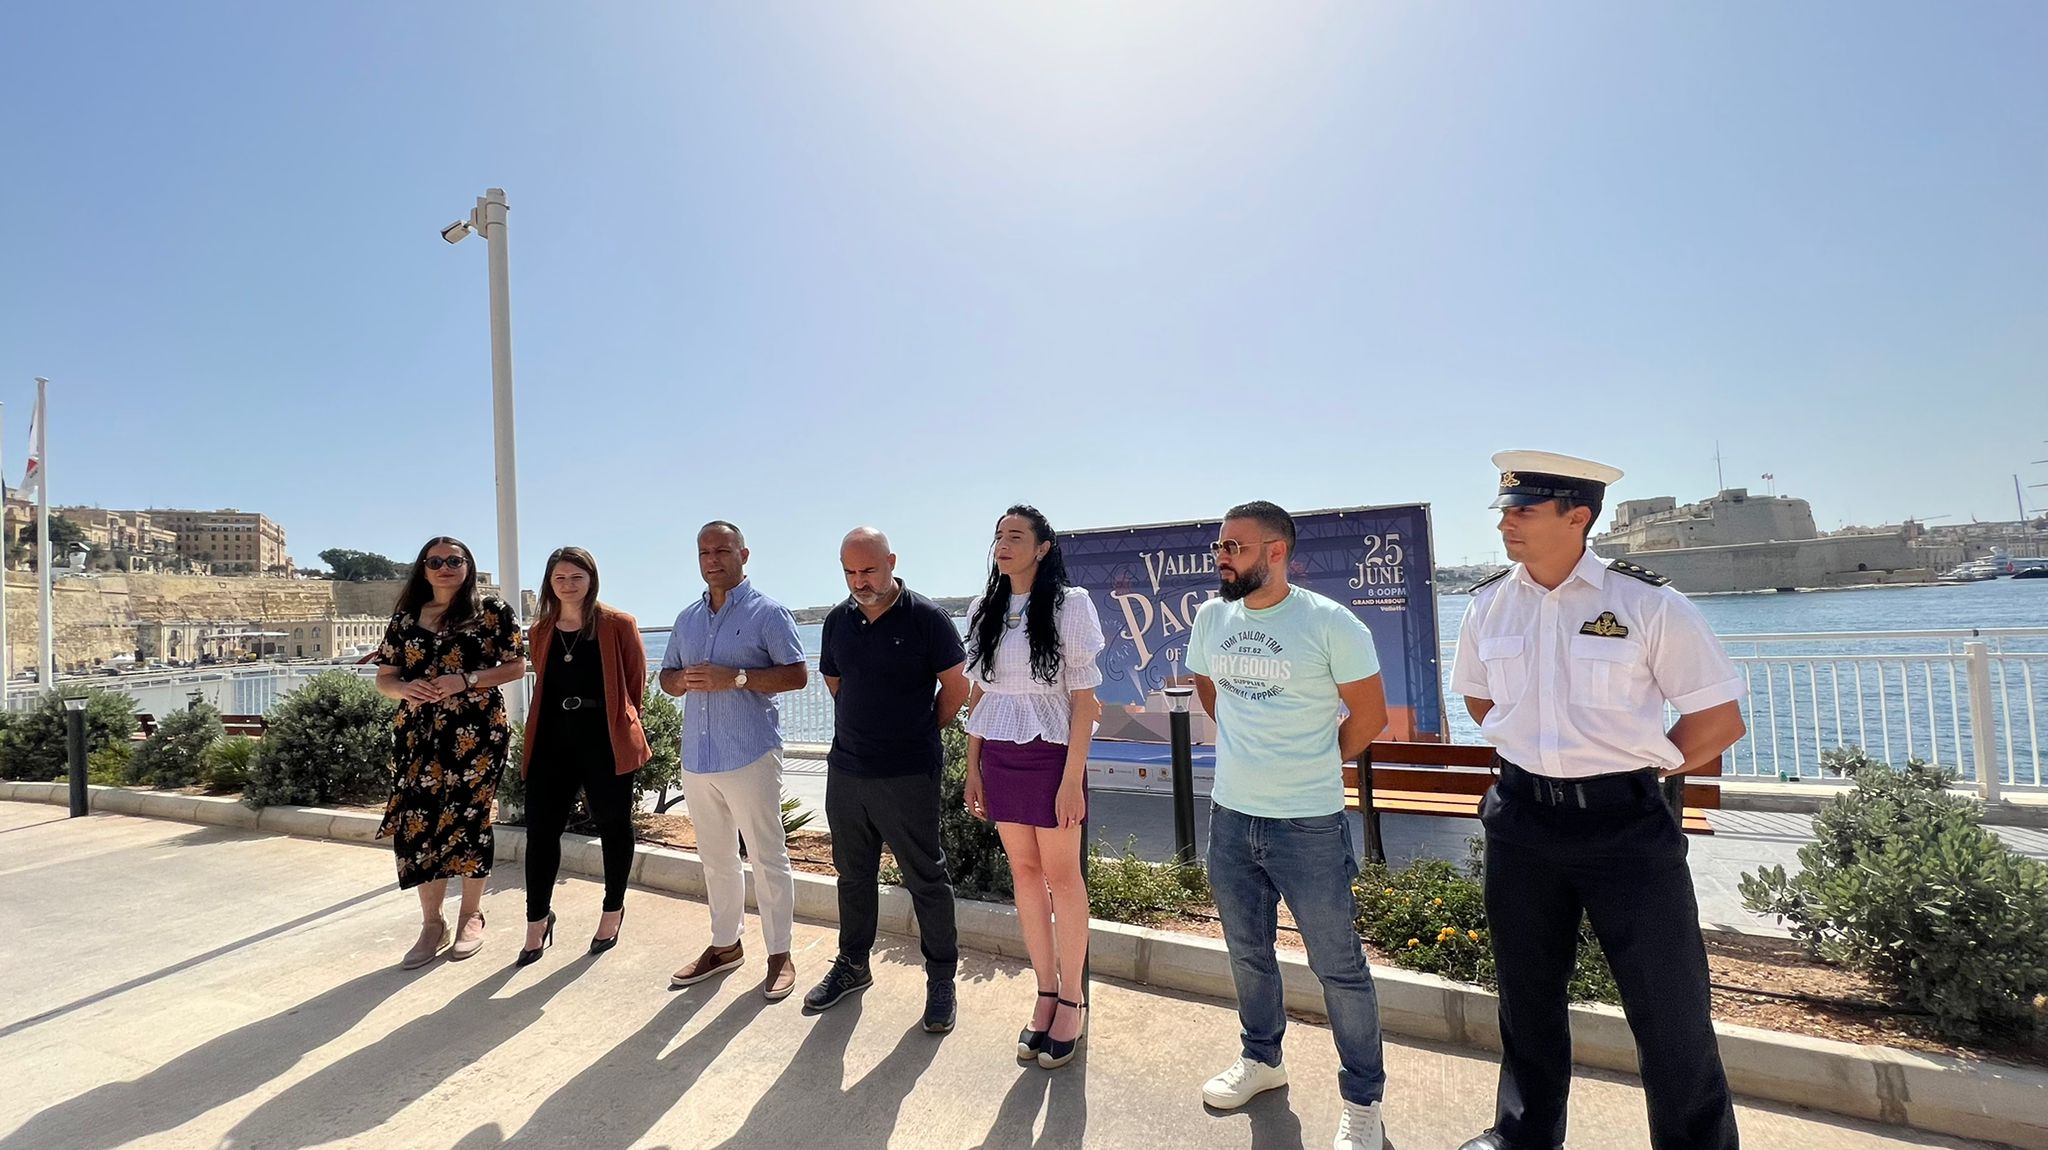 Valletta Pageant of the Seas logistical details announced